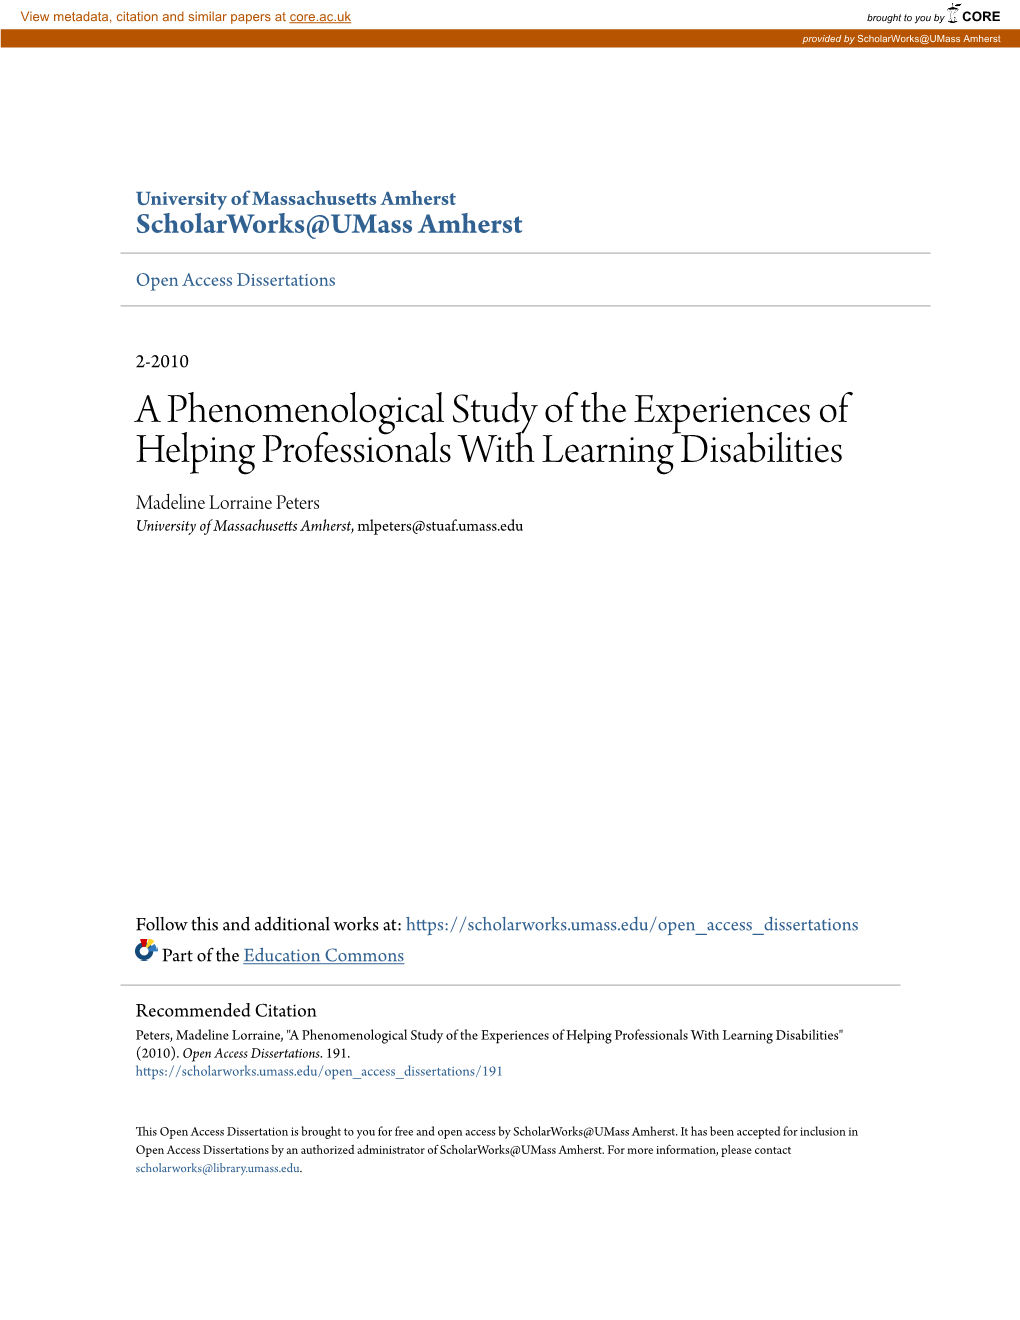 A Phenomenological Study of the Experiences of Helping